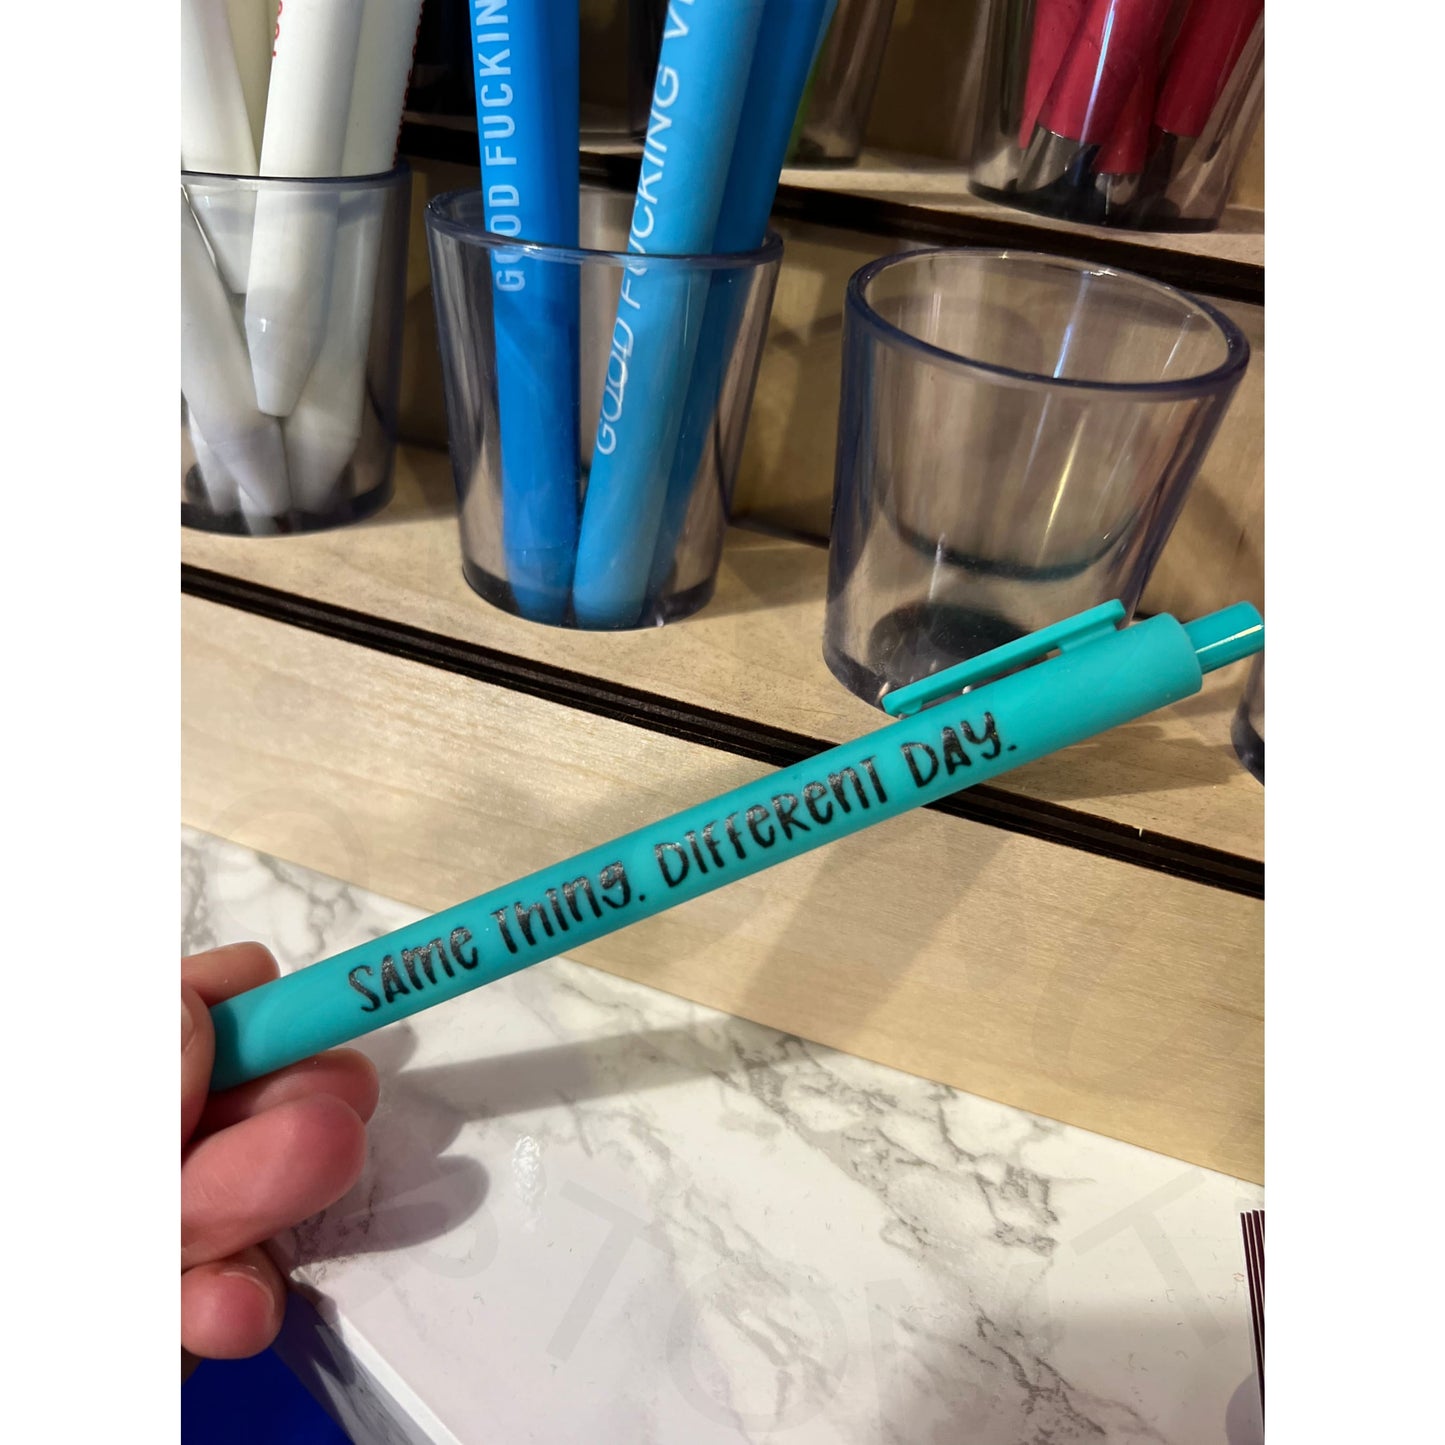 Basic Sarcastic Pens - Same Thing Different Day